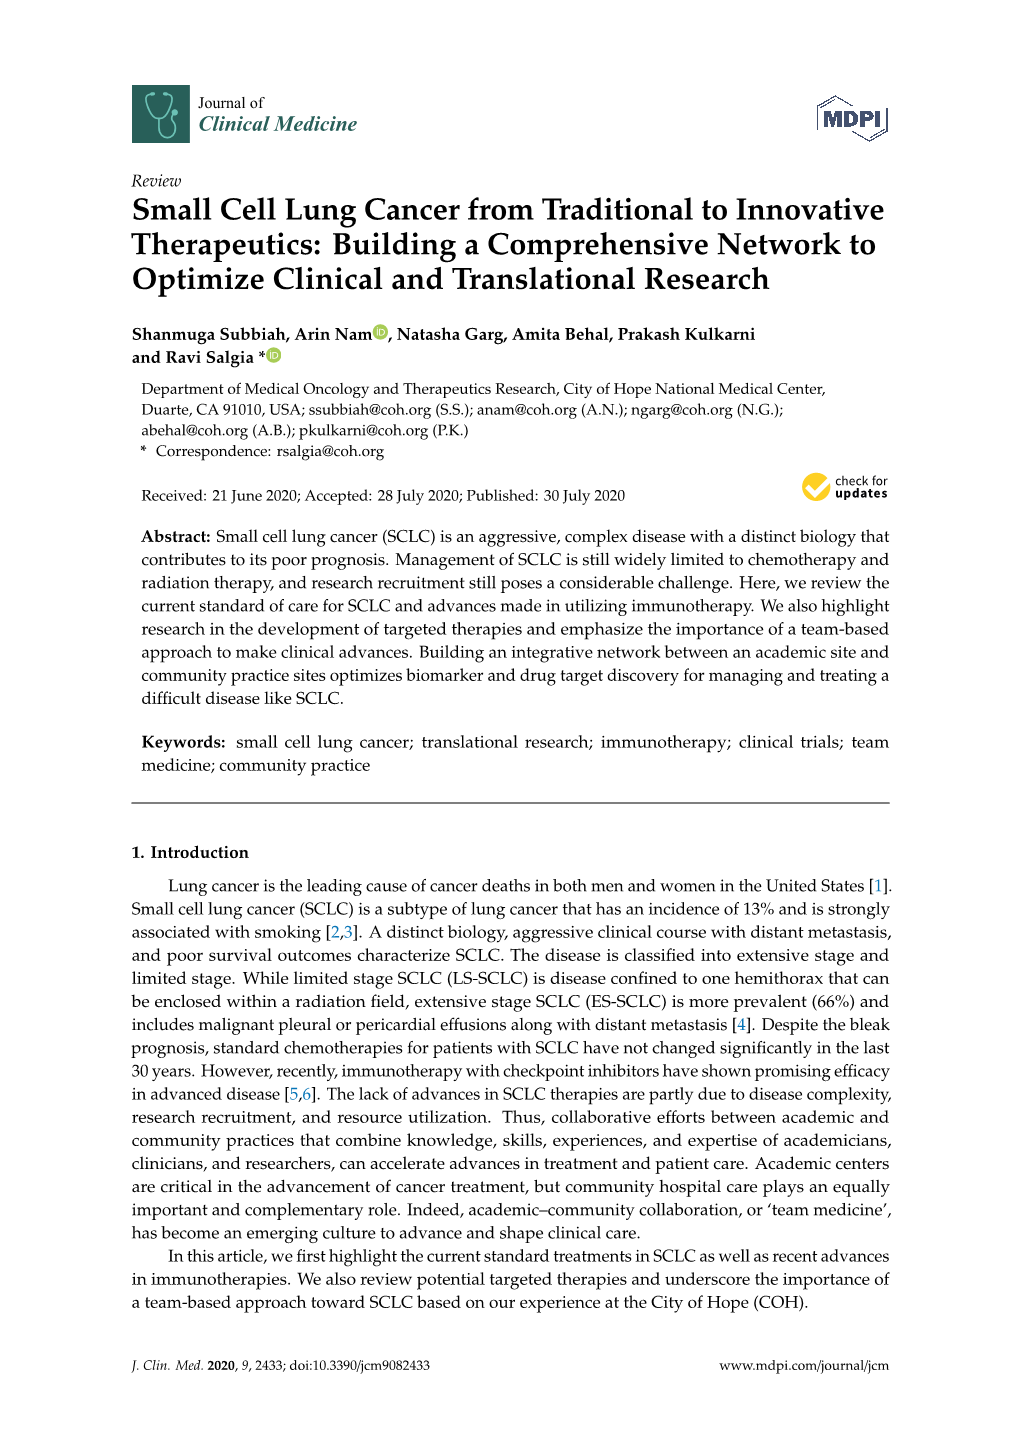 Small Cell Lung Cancer from Traditional to Innovative Therapeutics: Building a Comprehensive Network to Optimize Clinical and Translational Research